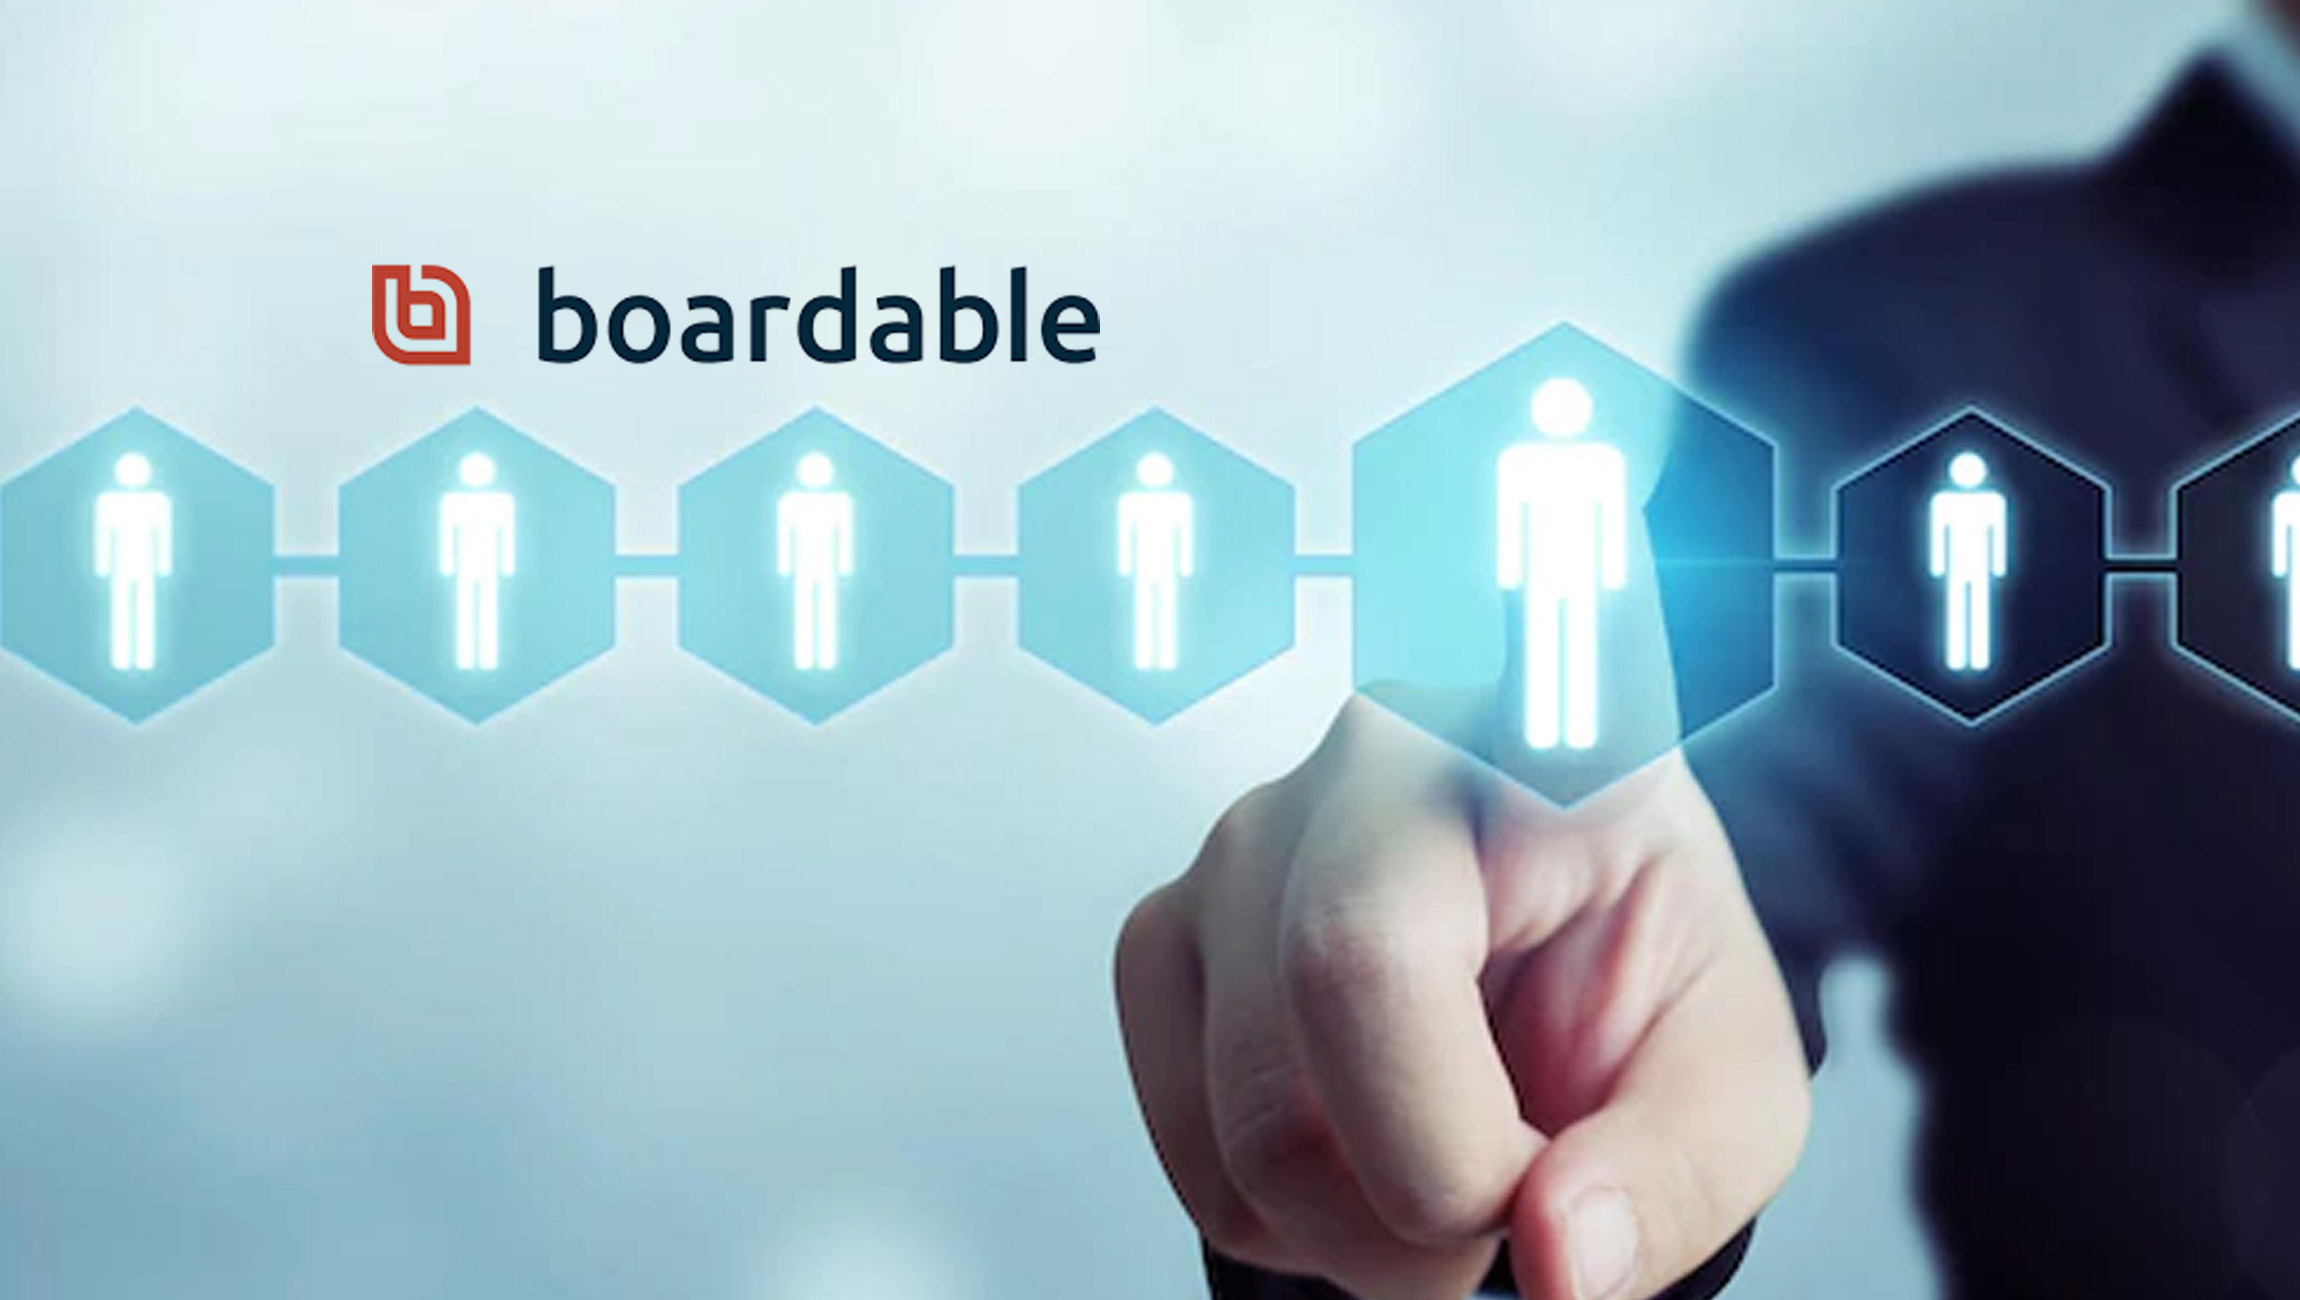 Boardable Scales for Next Stage of Growth, Promotes Jeff Middlesworth to CEO